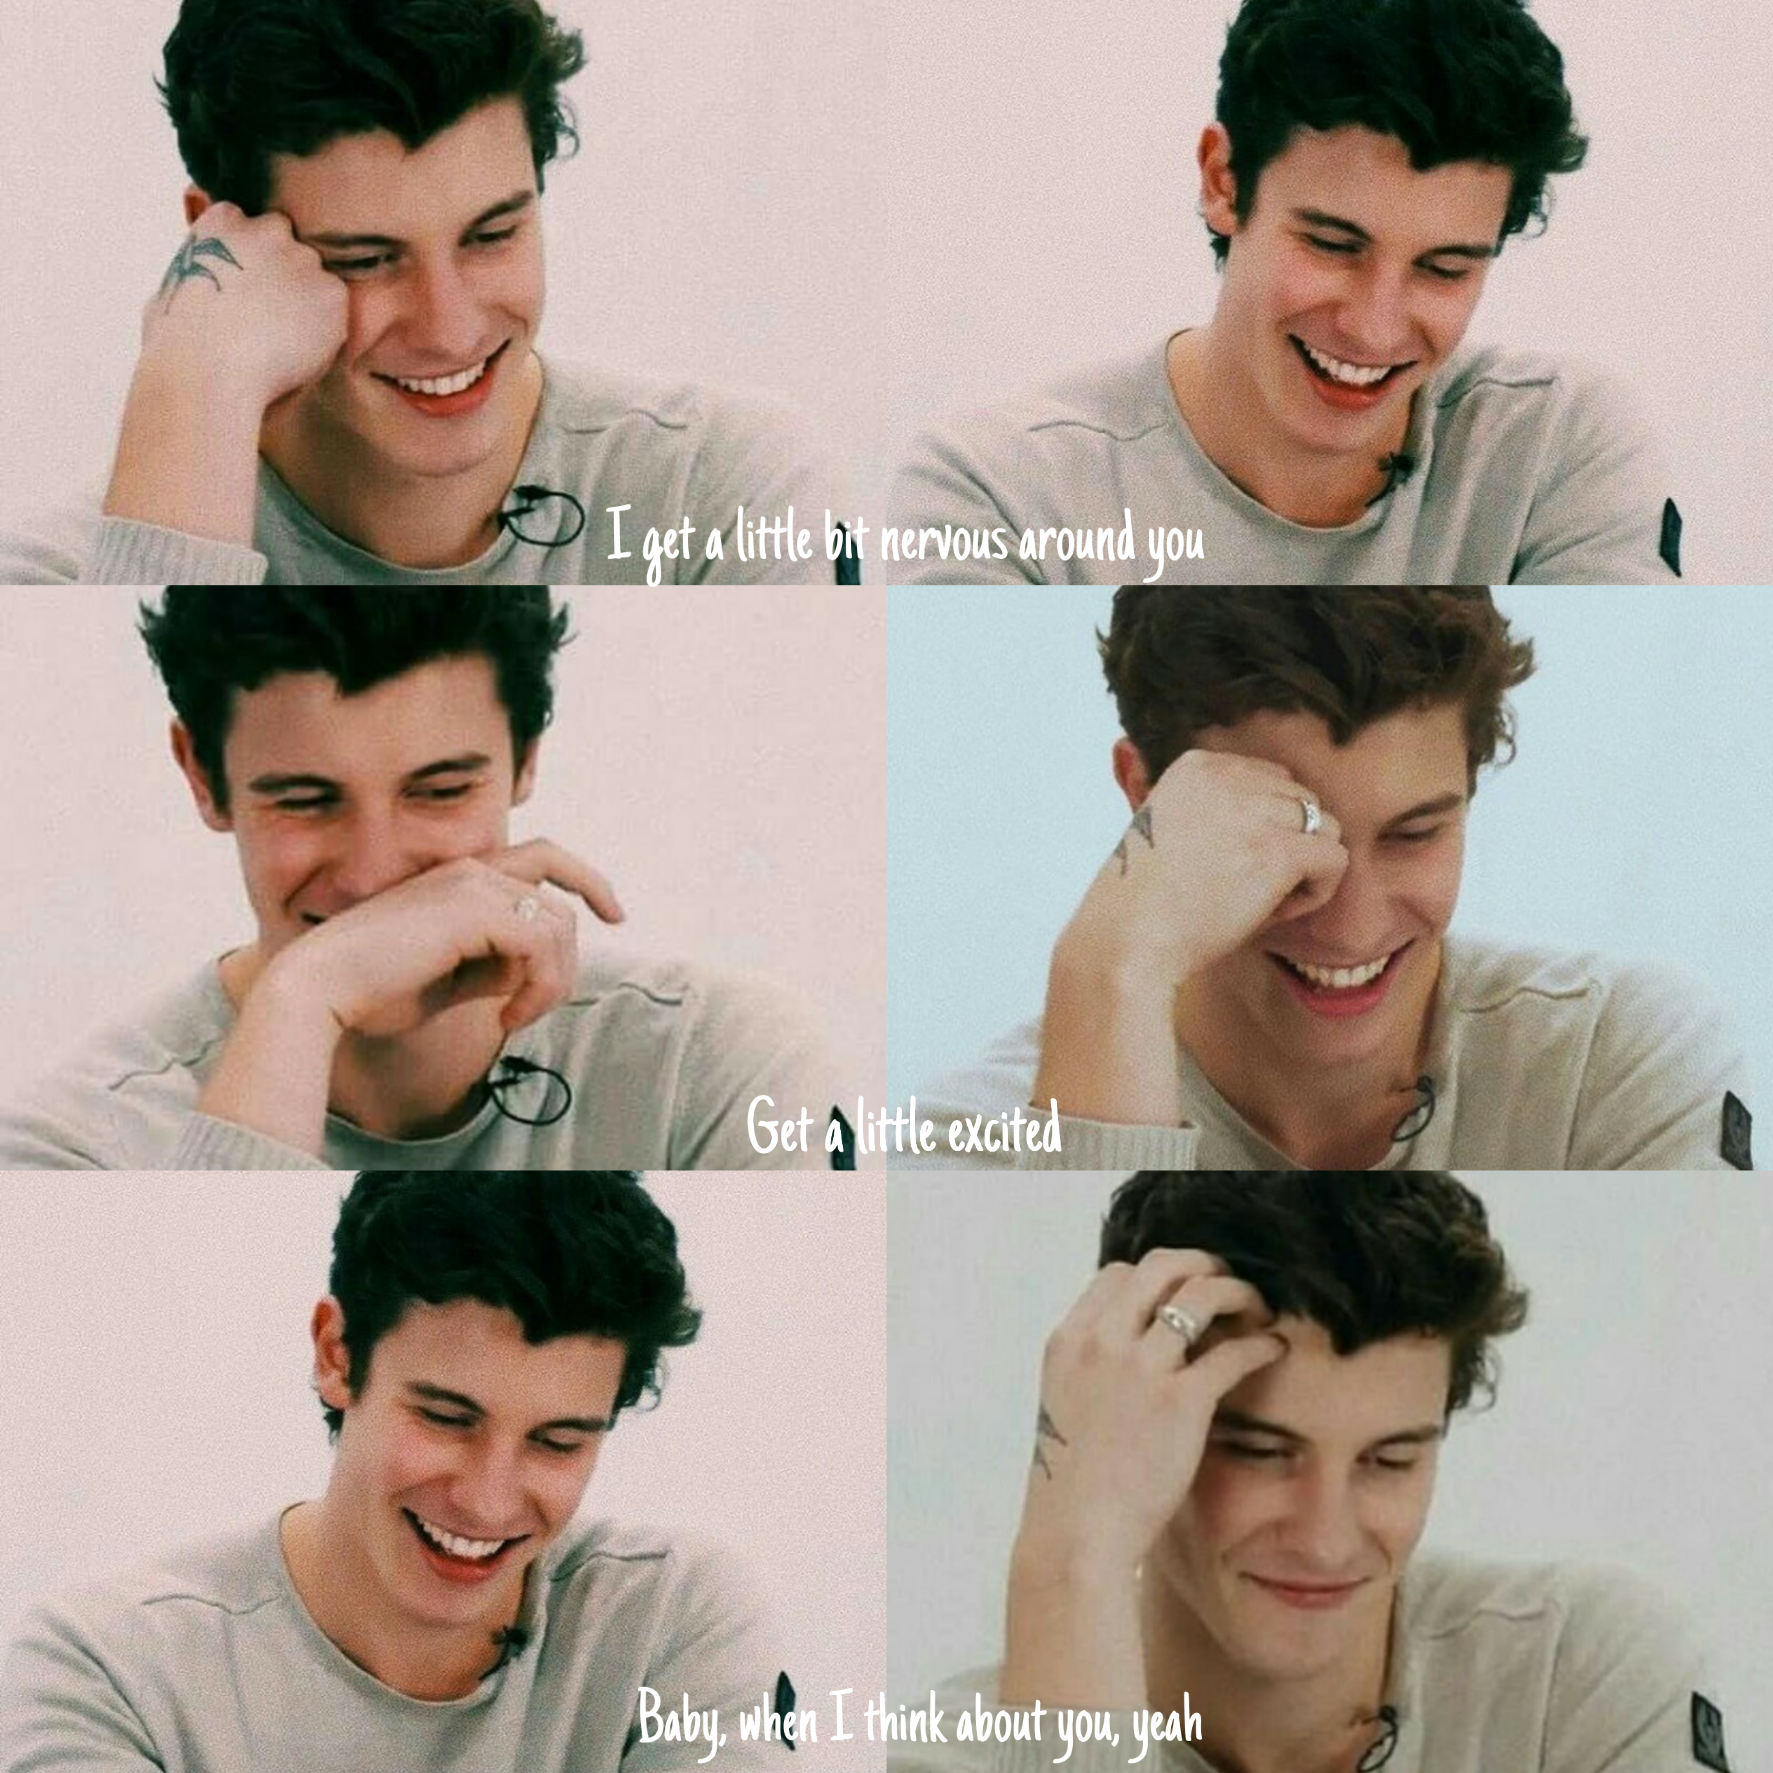 shawn mendes boys cute Image by °ely°